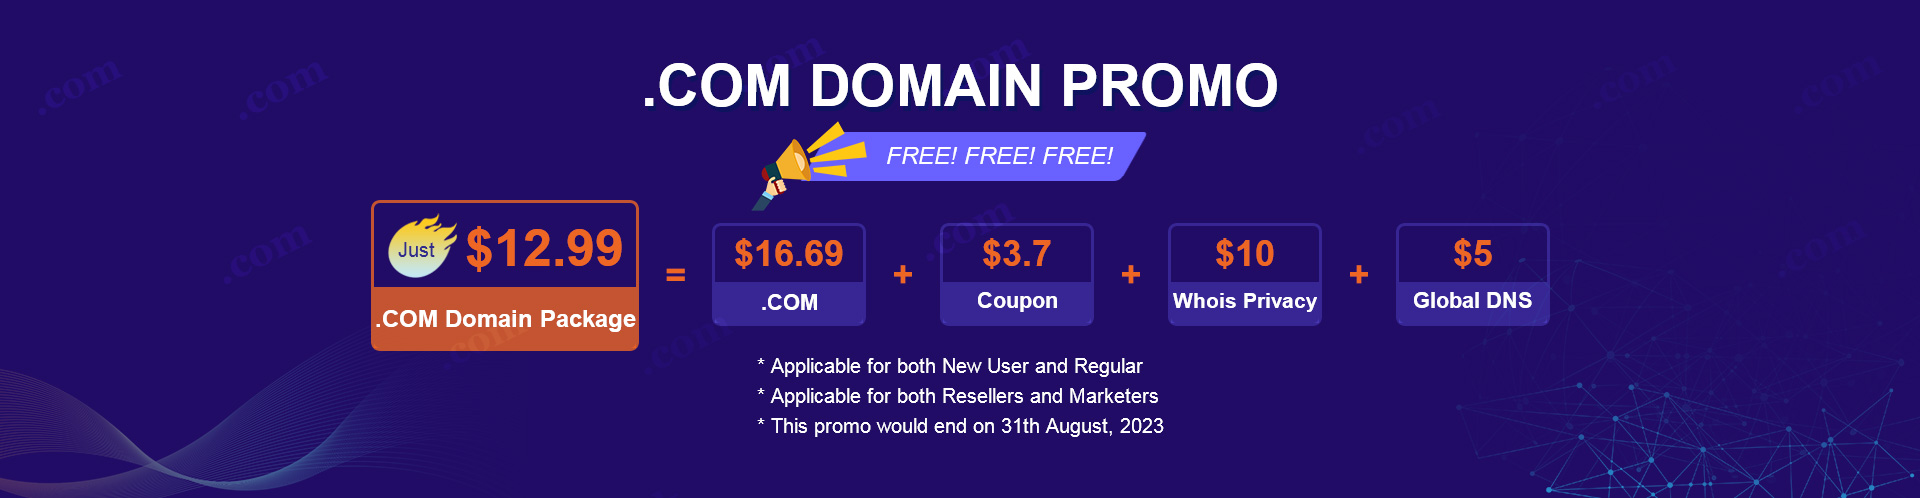 Promos and Deals - Save on .COM Domains | NiceNIC.NET